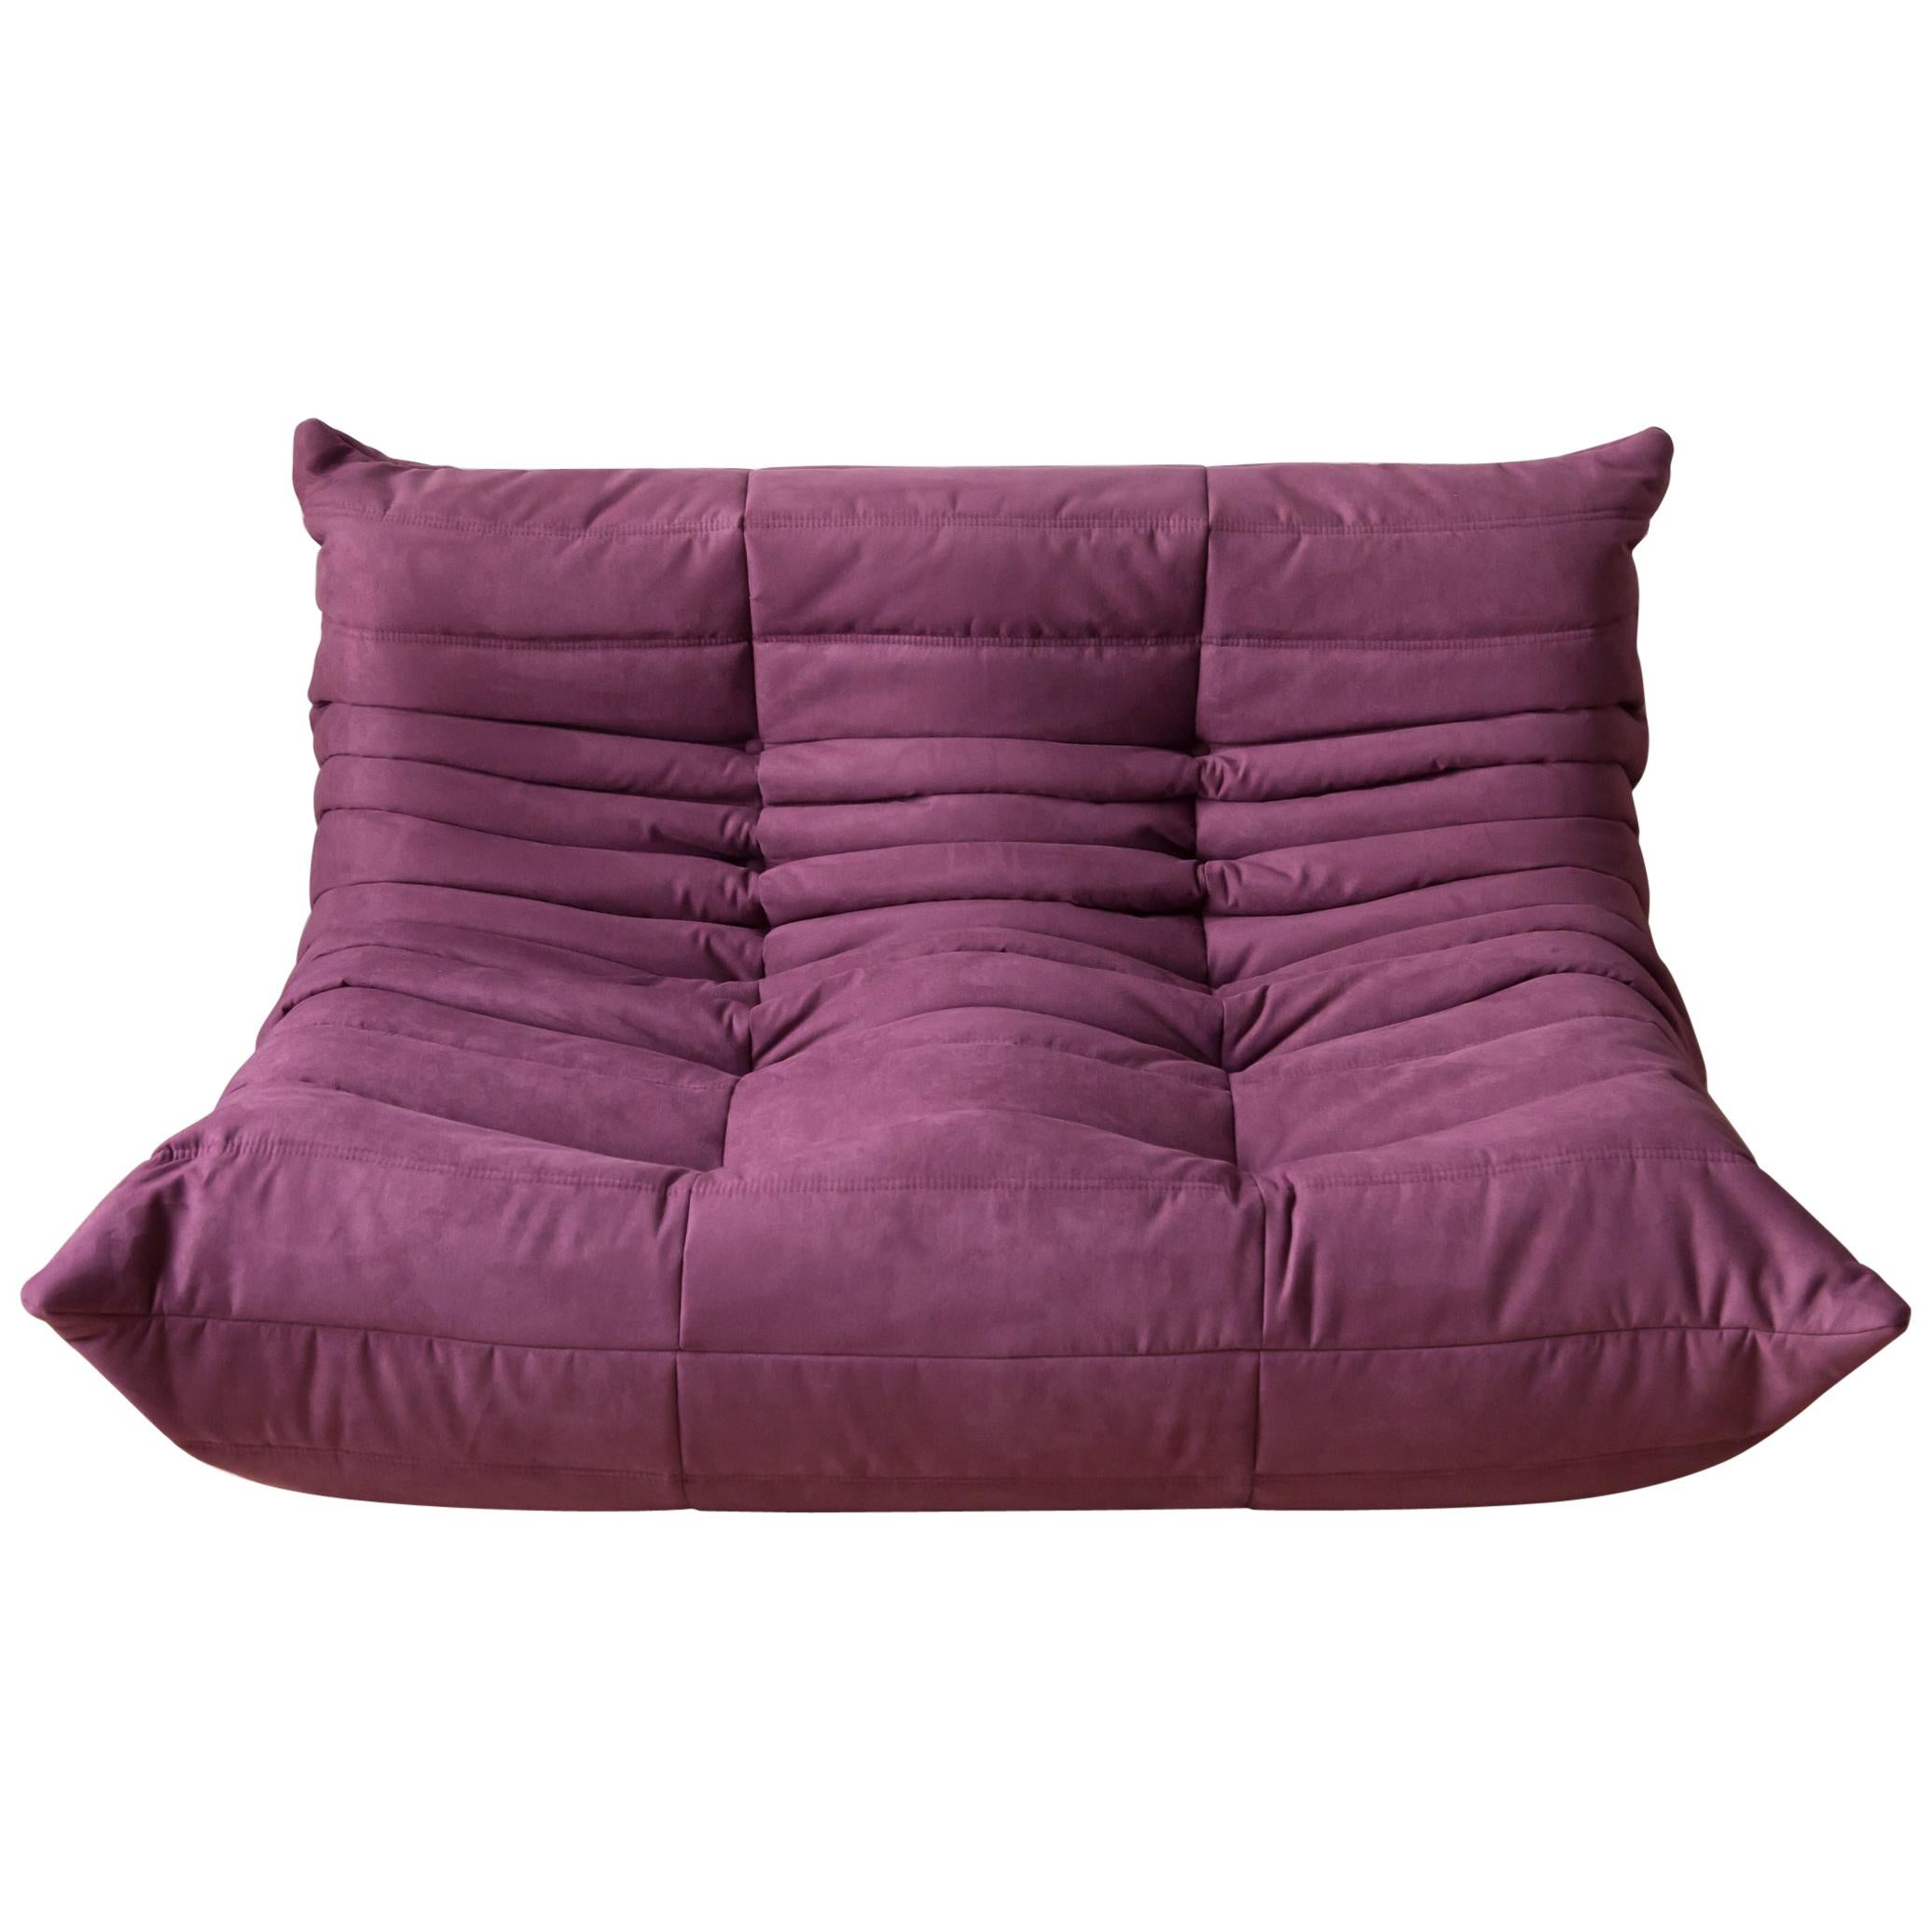 Togo 2-Seat Sofa in Aubergine Microfibre by Michel Ducaroy for Ligne Roset For Sale